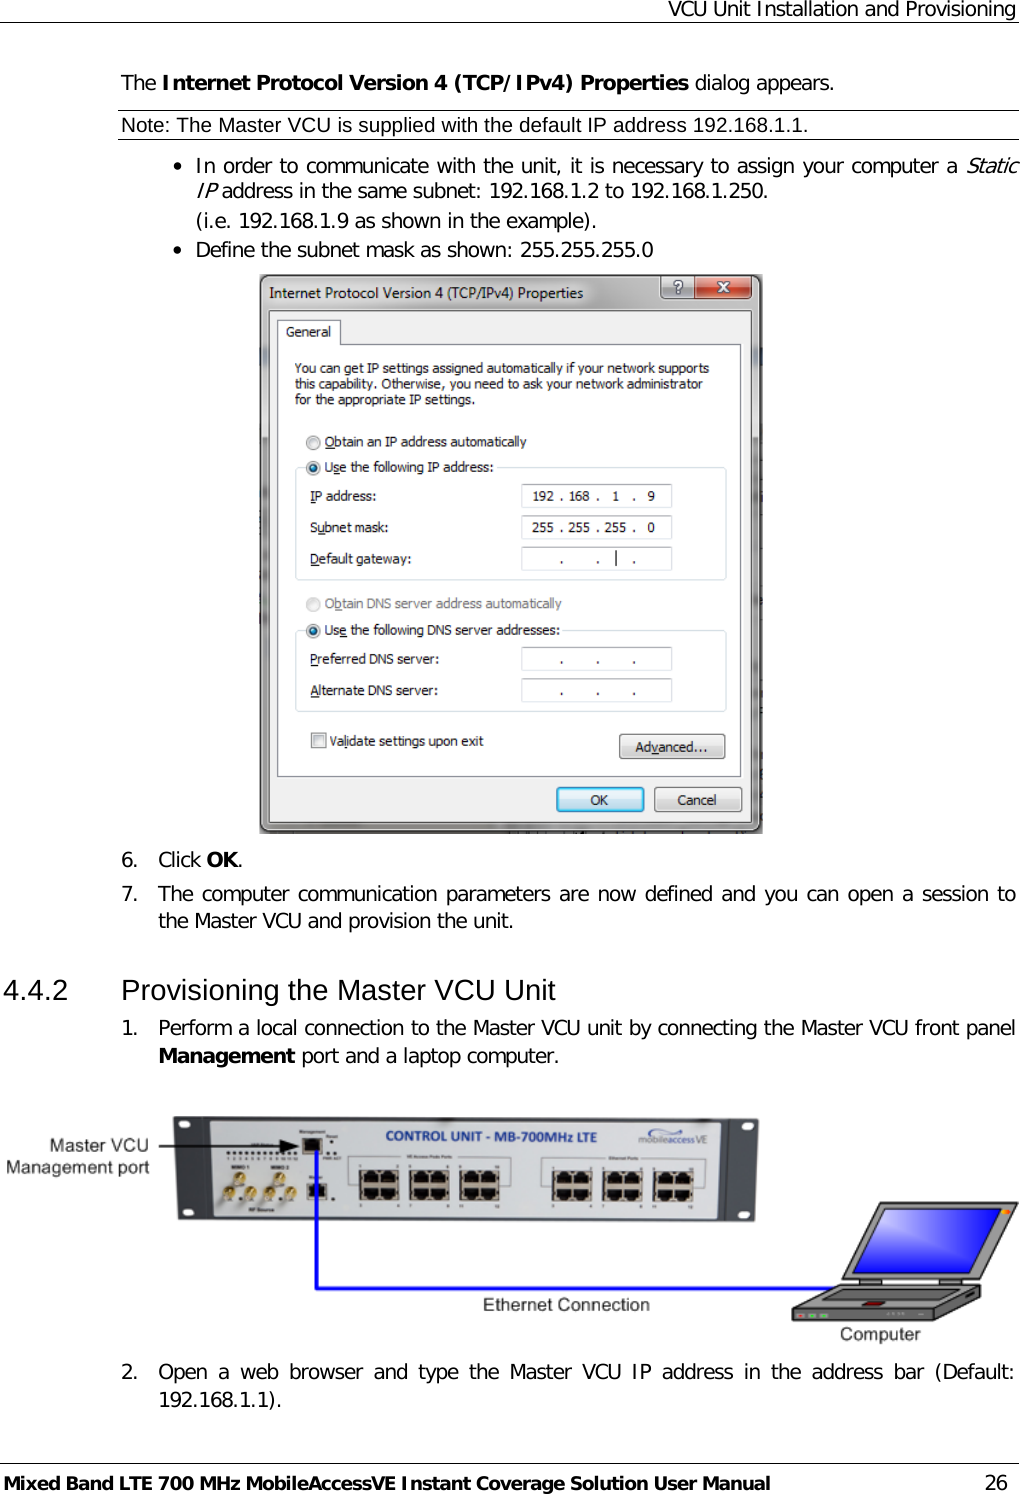 VCU Unit Installation and Provisioning Mixed Band LTE 700 MHz MobileAccessVE Instant Coverage Solution User Manual  26 The Internet Protocol Version 4 (TCP/IPv4) Properties dialog appears. Note: The Master VCU is supplied with the default IP address 192.168.1.1. • In order to communicate with the unit, it is necessary to assign your computer a Static IP address in the same subnet: 192.168.1.2 to 192.168.1.250.  (i.e. 192.168.1.9 as shown in the example). • Define the subnet mask as shown: 255.255.255.0  6.  Click OK.  7.  The computer communication parameters are now defined and you can open a session to the Master VCU and provision the unit. 4.4.2  Provisioning the Master VCU Unit 1.  Perform a local connection to the Master VCU unit by connecting the Master VCU front panel Management port and a laptop computer.   2.  Open a web browser and type the  Master VCU IP address in the address bar (Default: 192.168.1.1). 